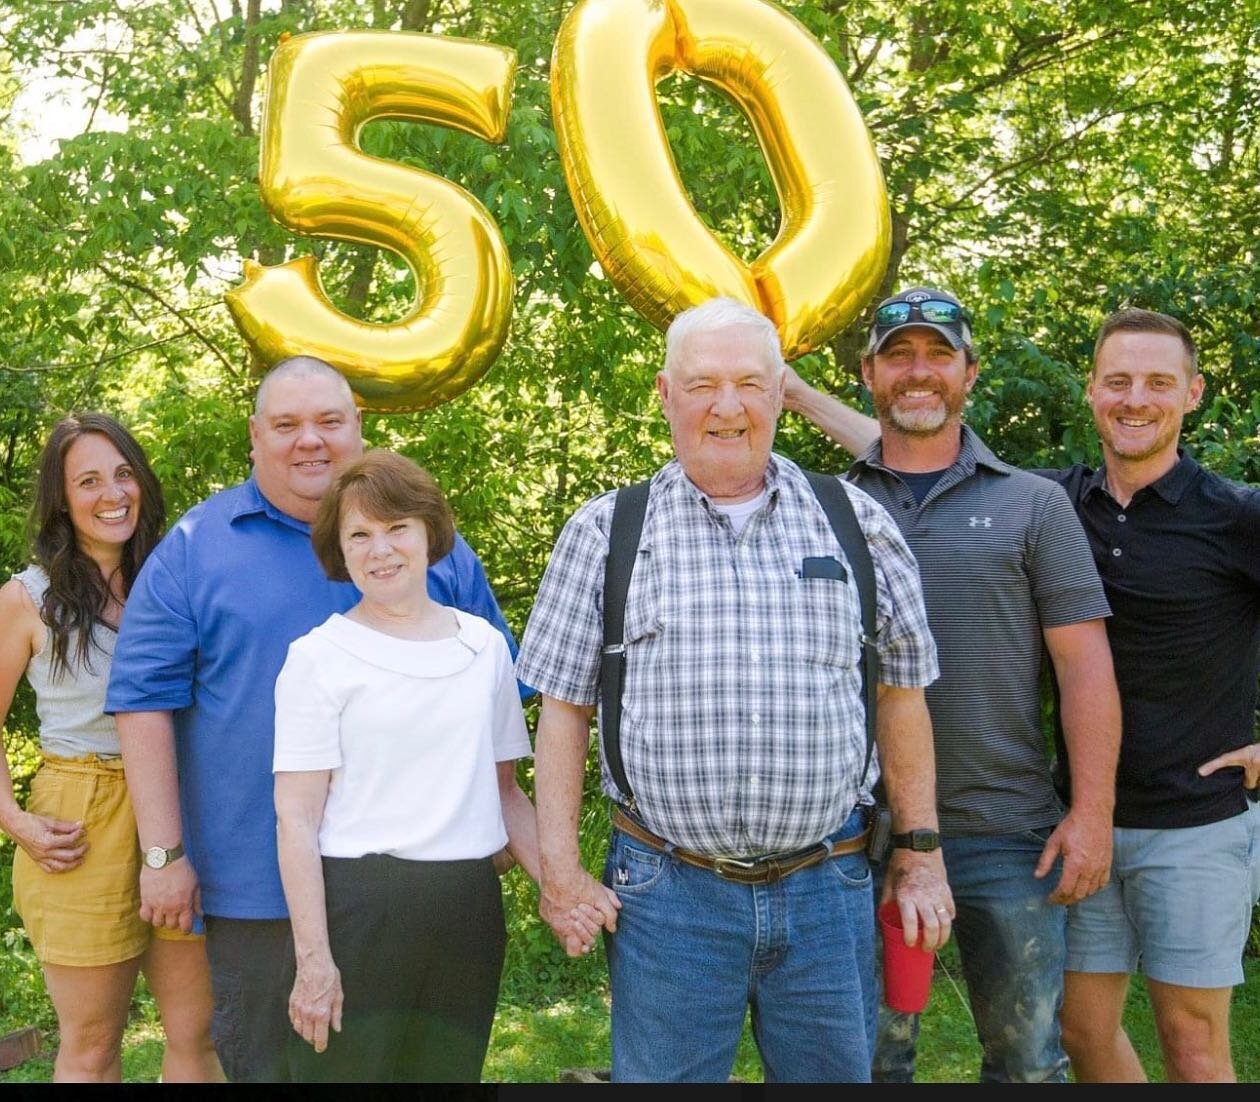 My siblings and I celebrating with my parents on their 50th anniversary.